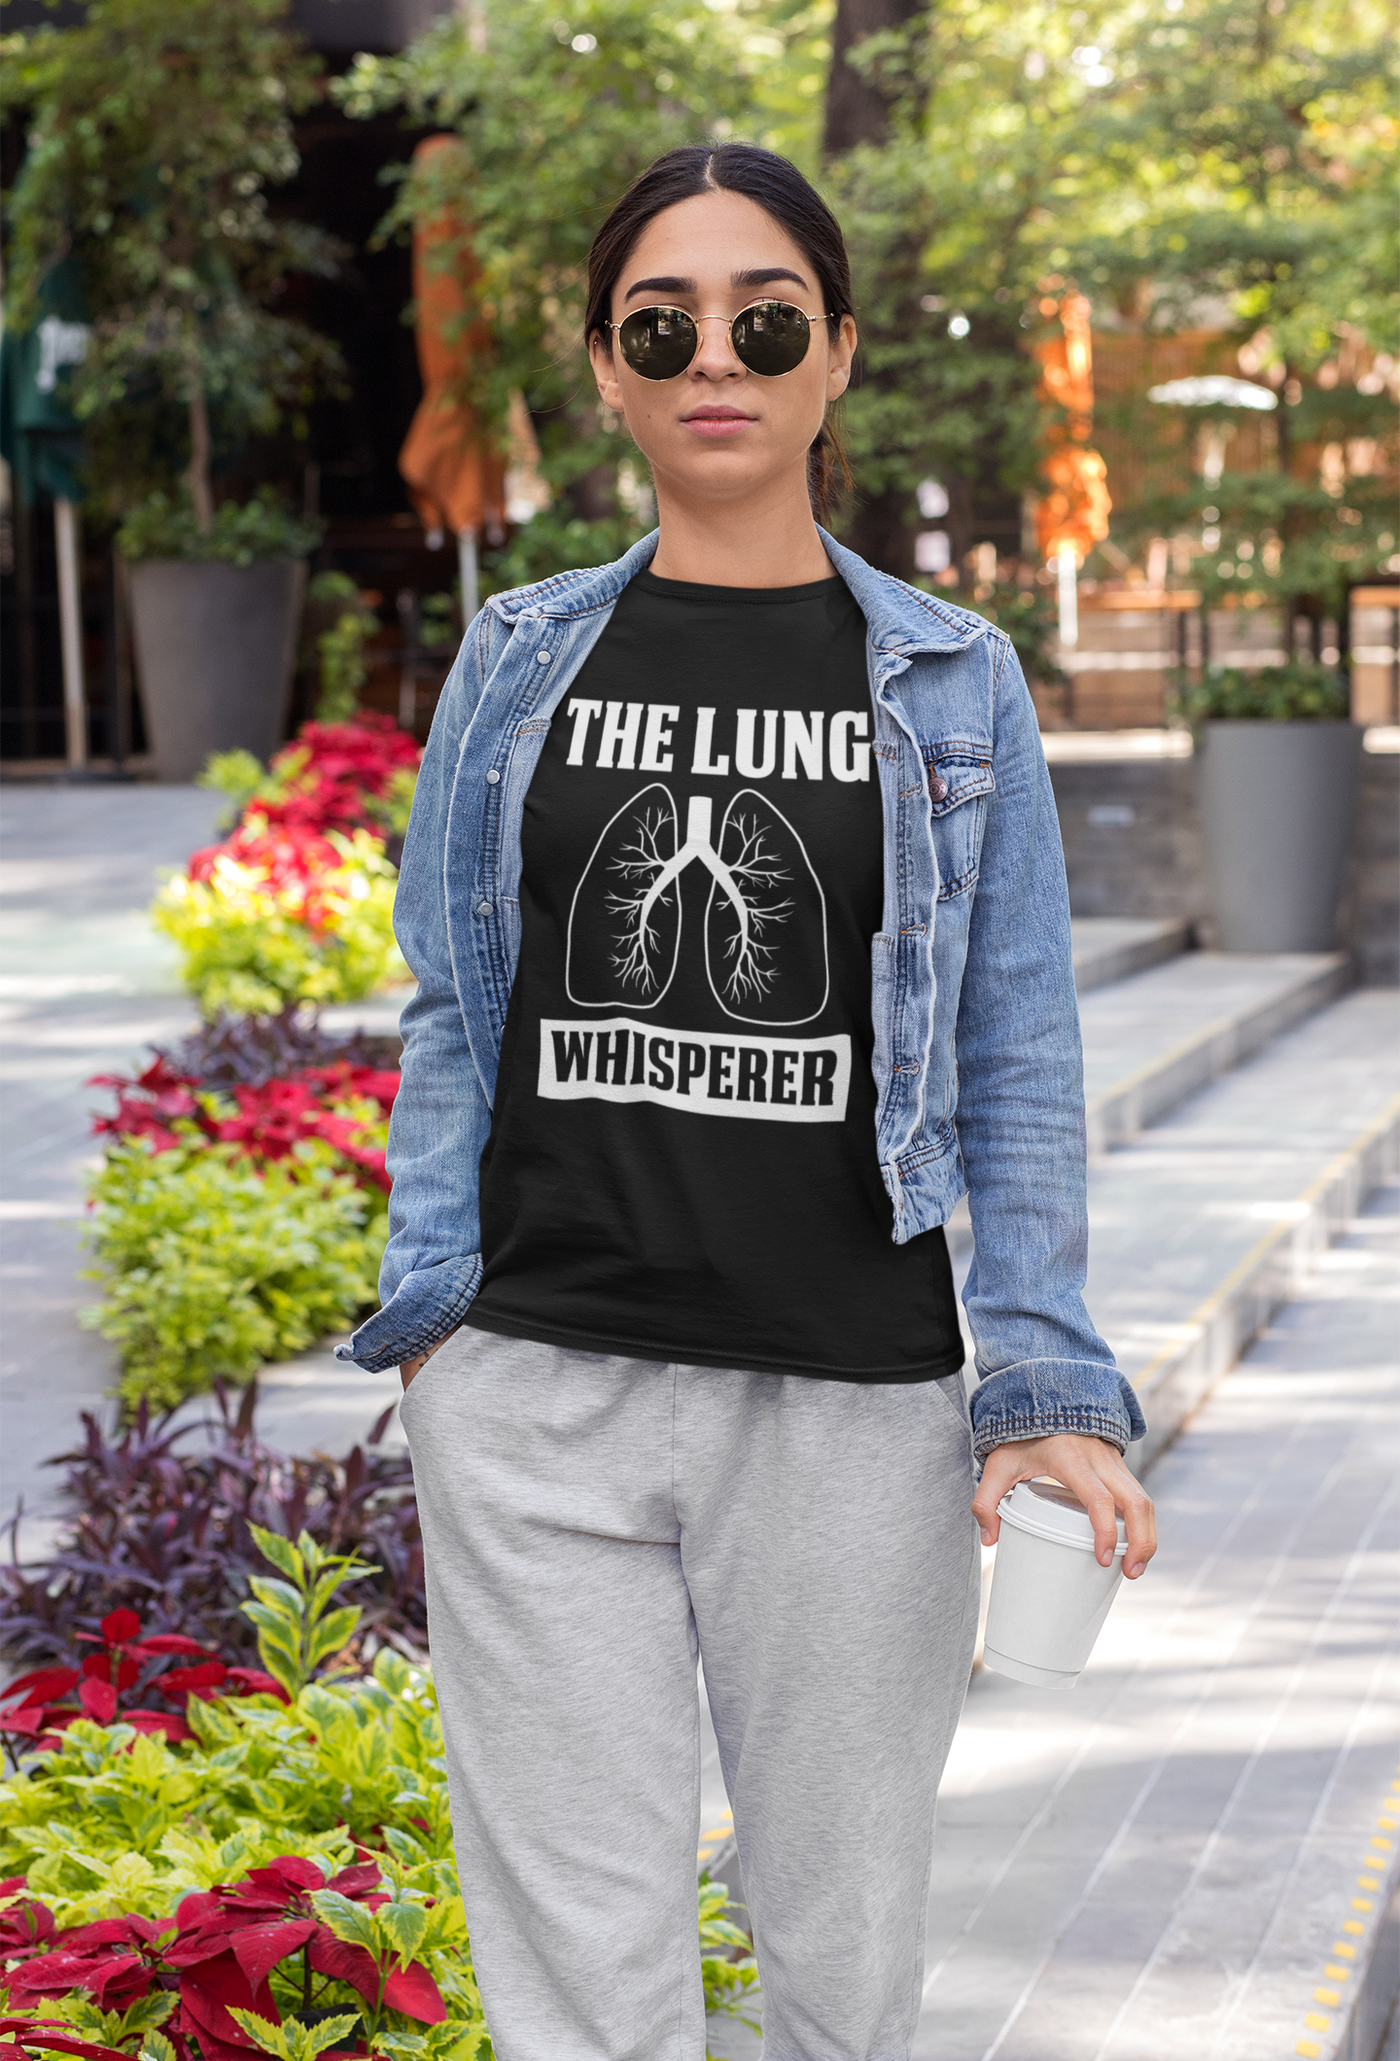 The Lung Whisperer